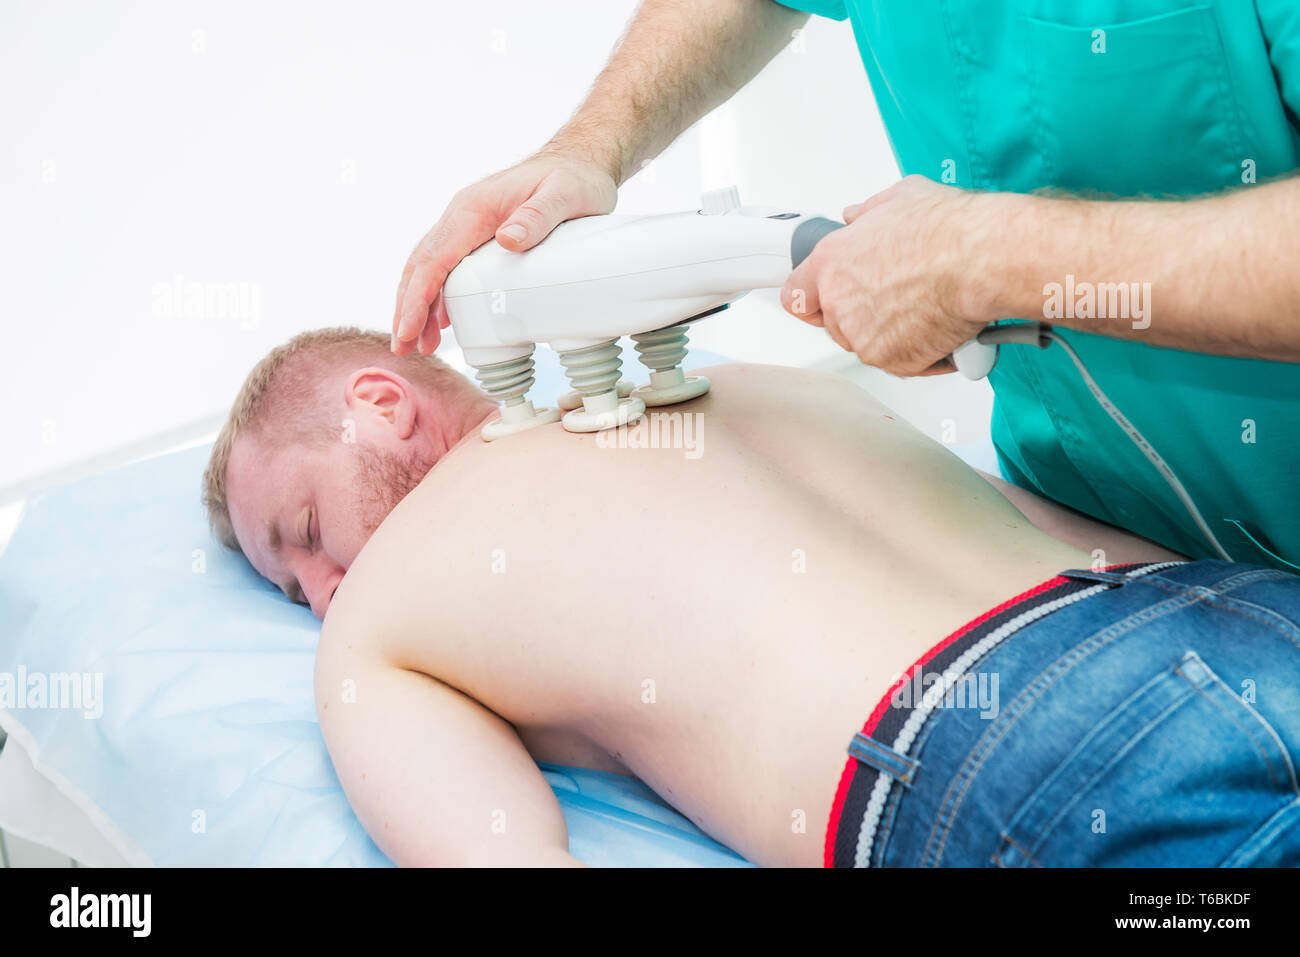 Doctor does transcranial magnetic stimulation, electrotherapeutic treatment of the back. A chiropractor treats patient's thoracic spine. Physiotherapy Stock Photo